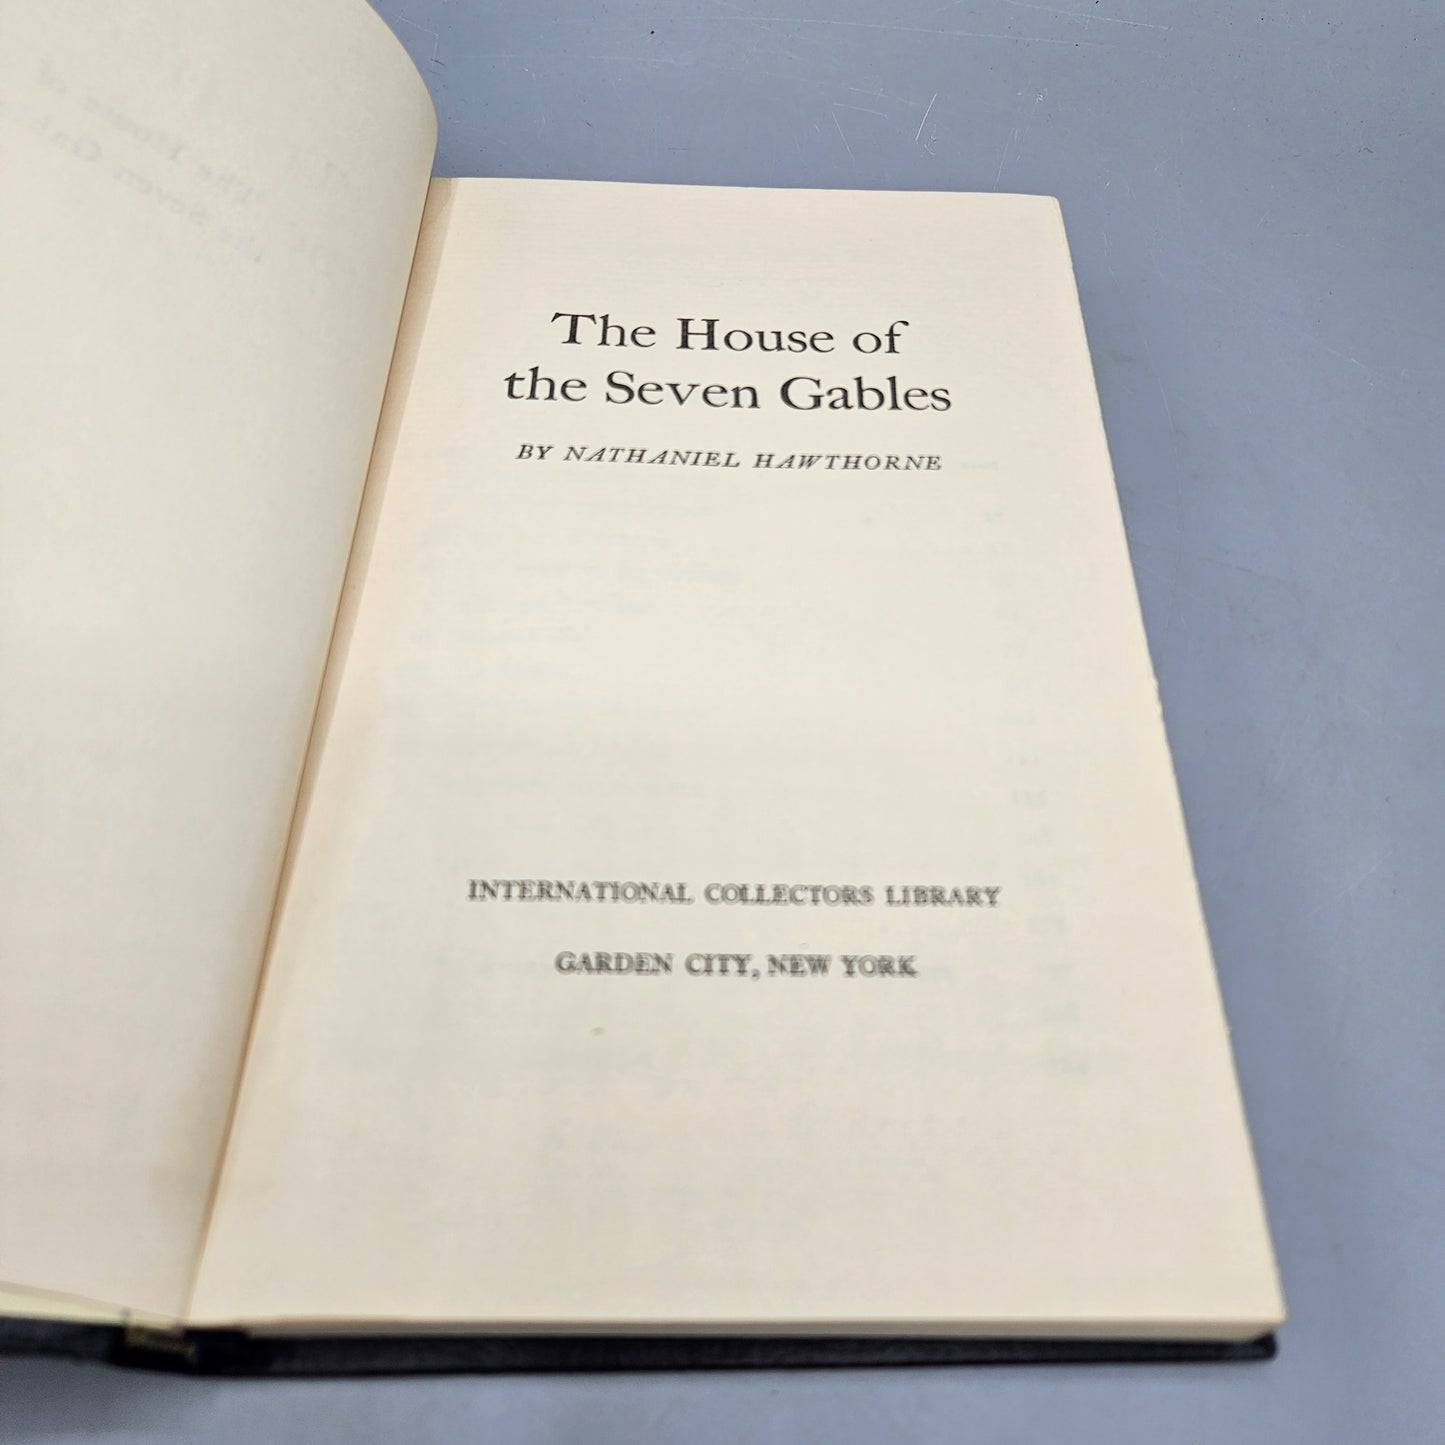 Nathaniel Hawthorne "The House of Seven Gables" International Collectors Library